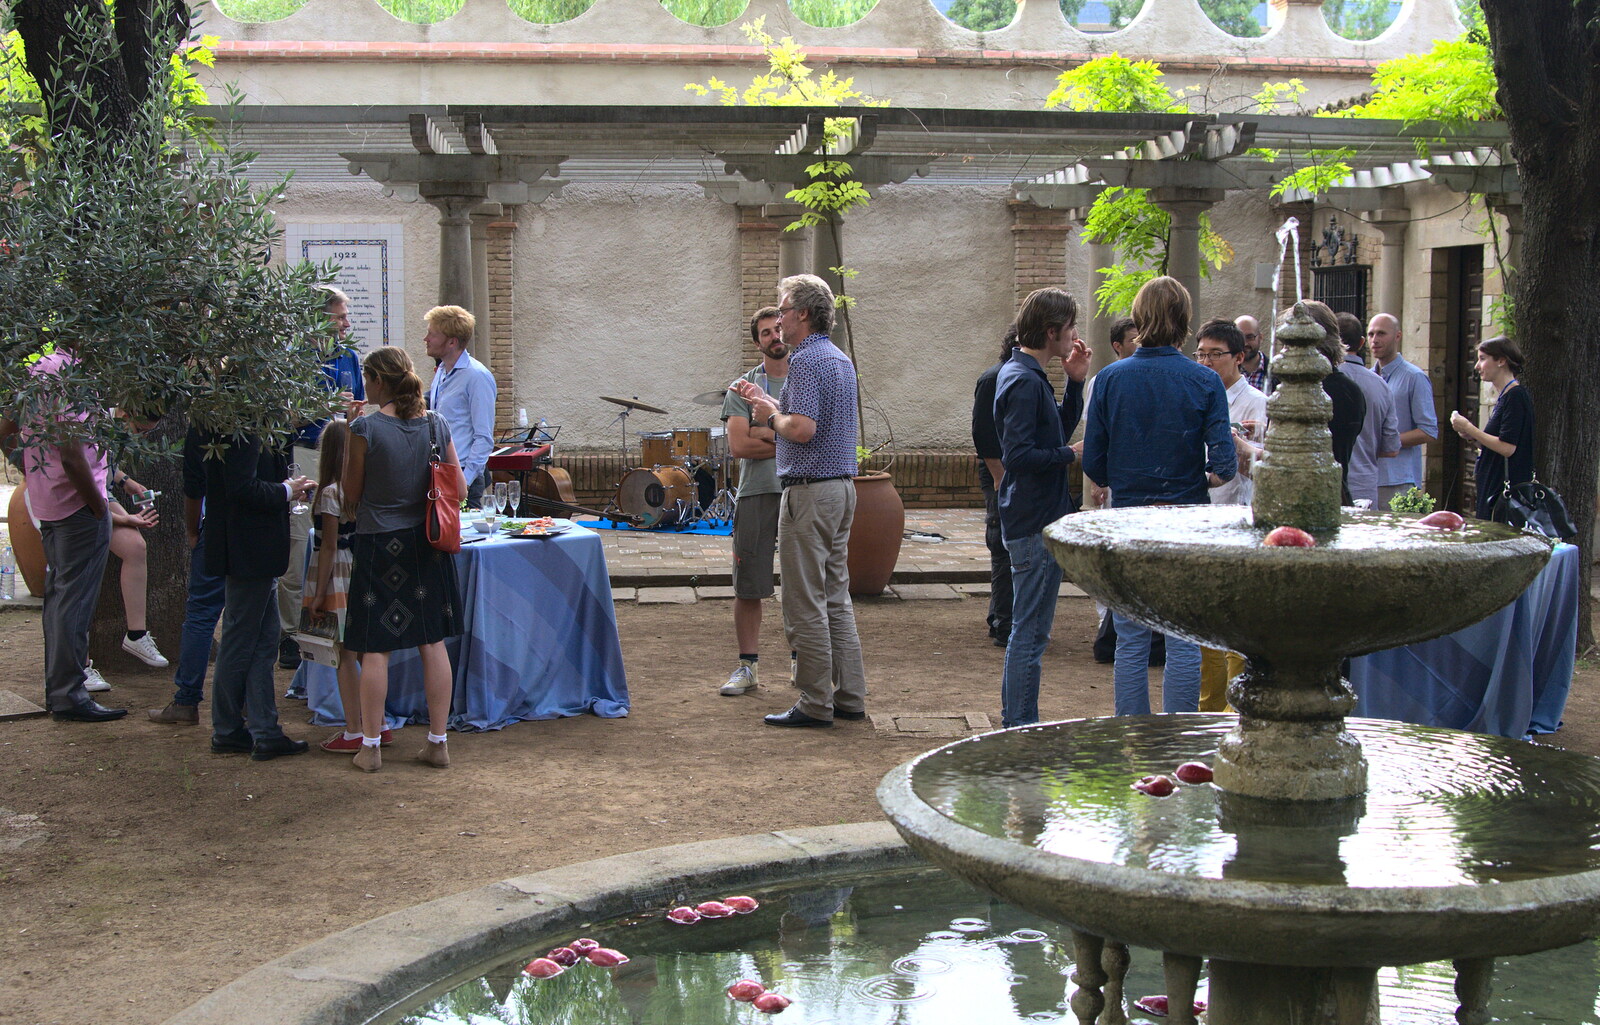 Conversation in the walled garden from The Open Education Challenge, Barcelona, Catalonia - 13th July 2014